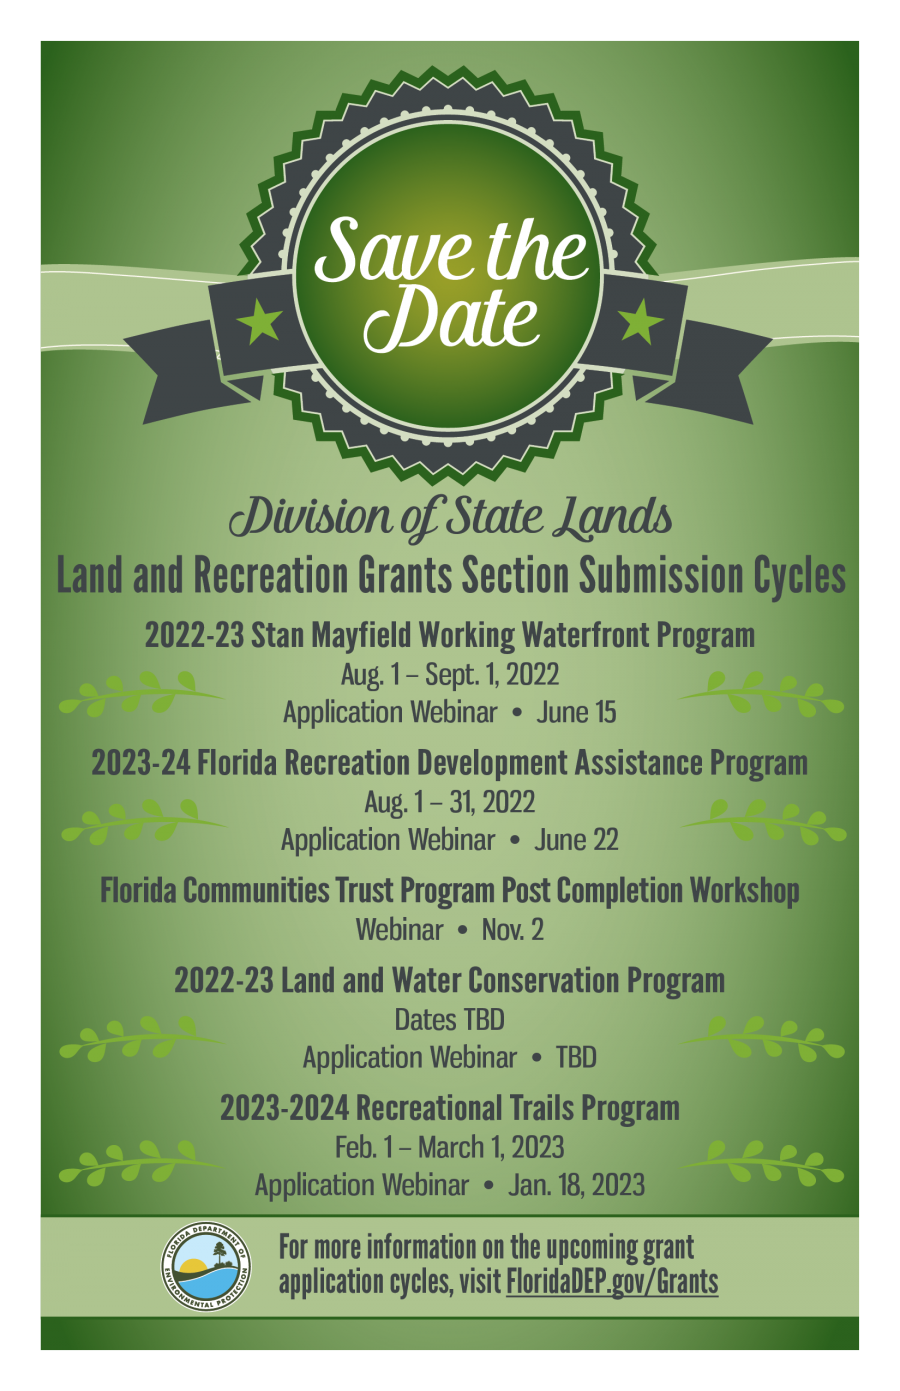 Land and Recreation Grant Submission Cycle dates 2022 and 2023